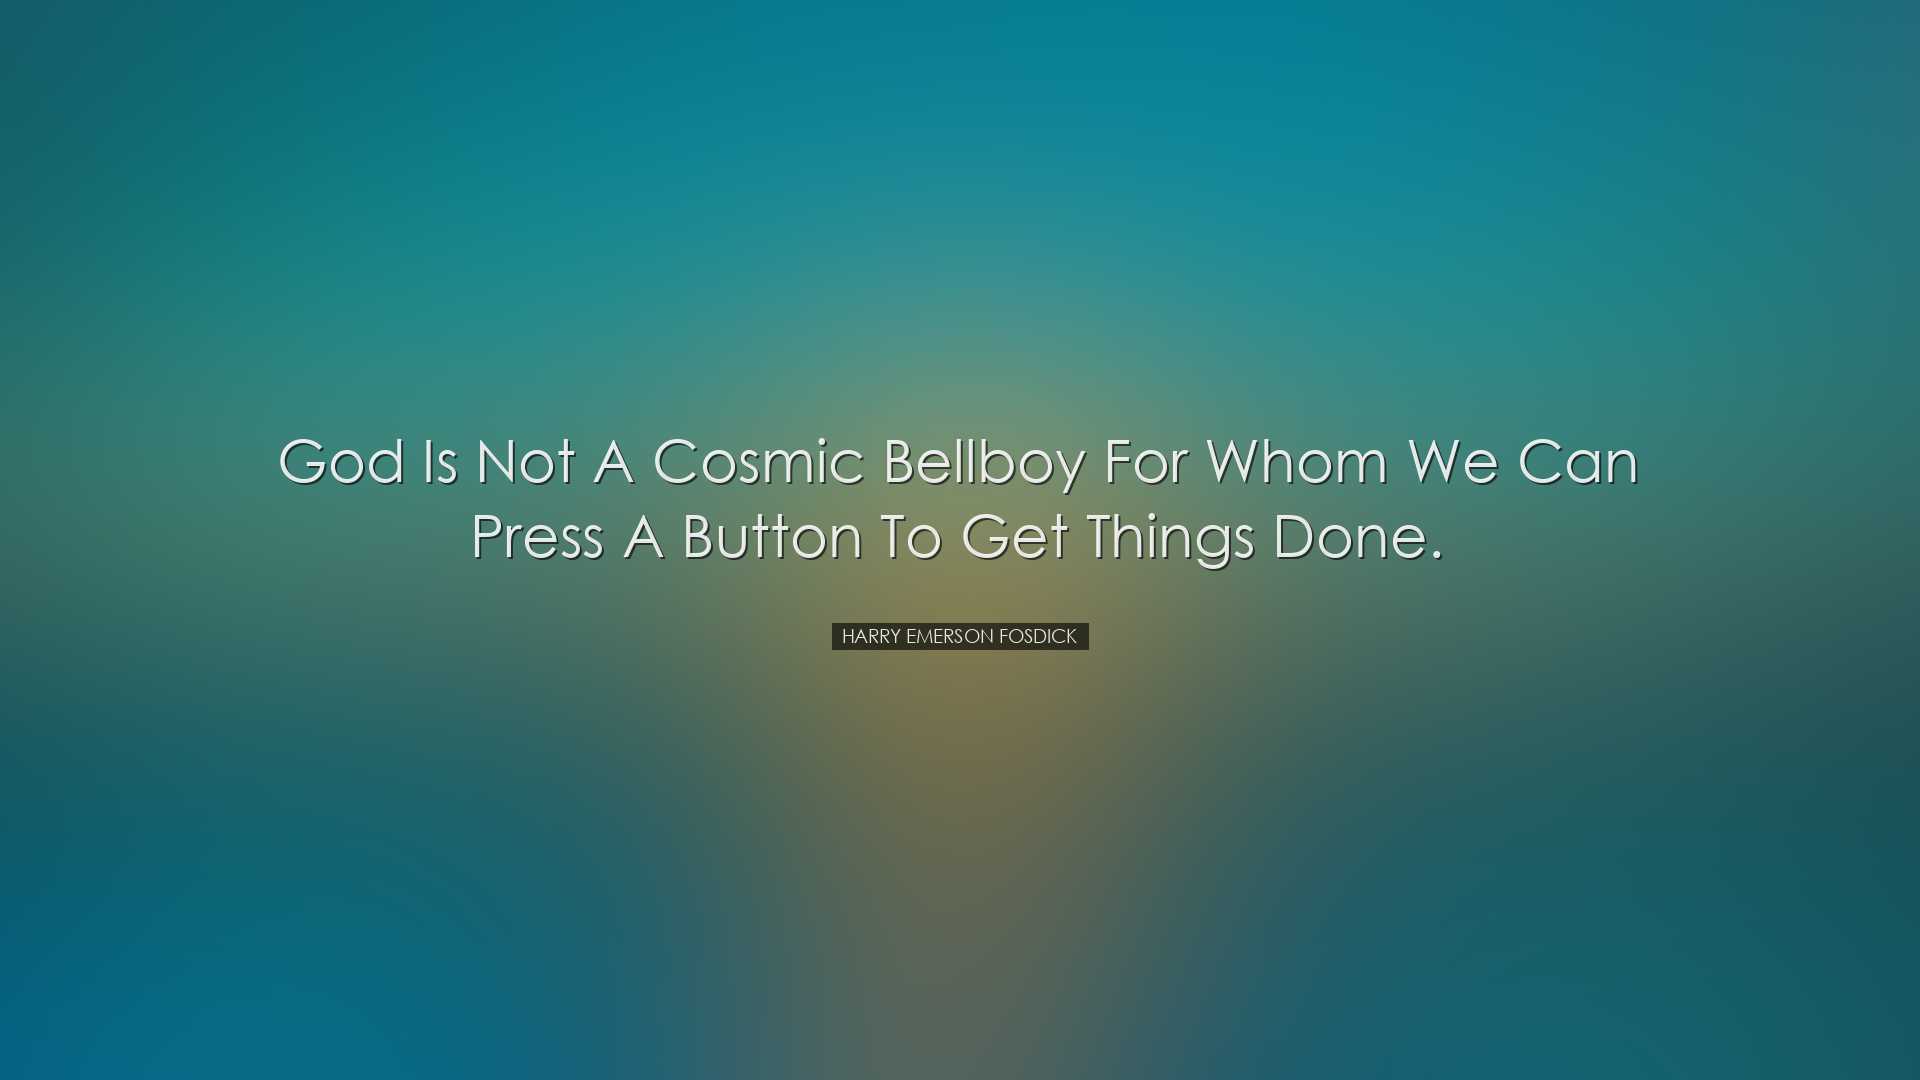 God is not a cosmic bellboy for whom we can press a button to get